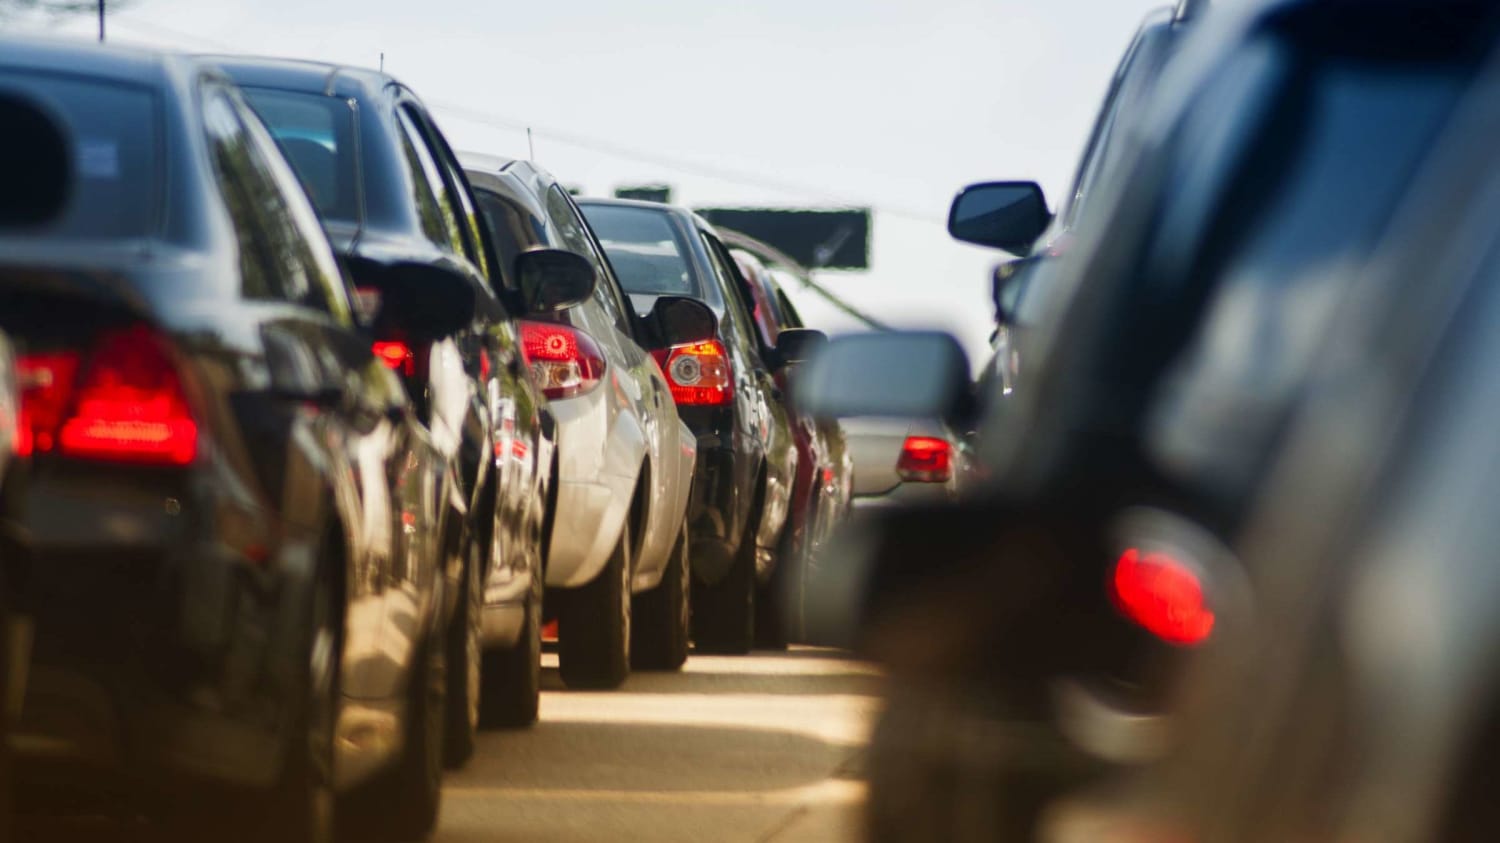 Driving This Thanksgiving Holiday? Here’s the Worst Time to Leave, According to Google Maps